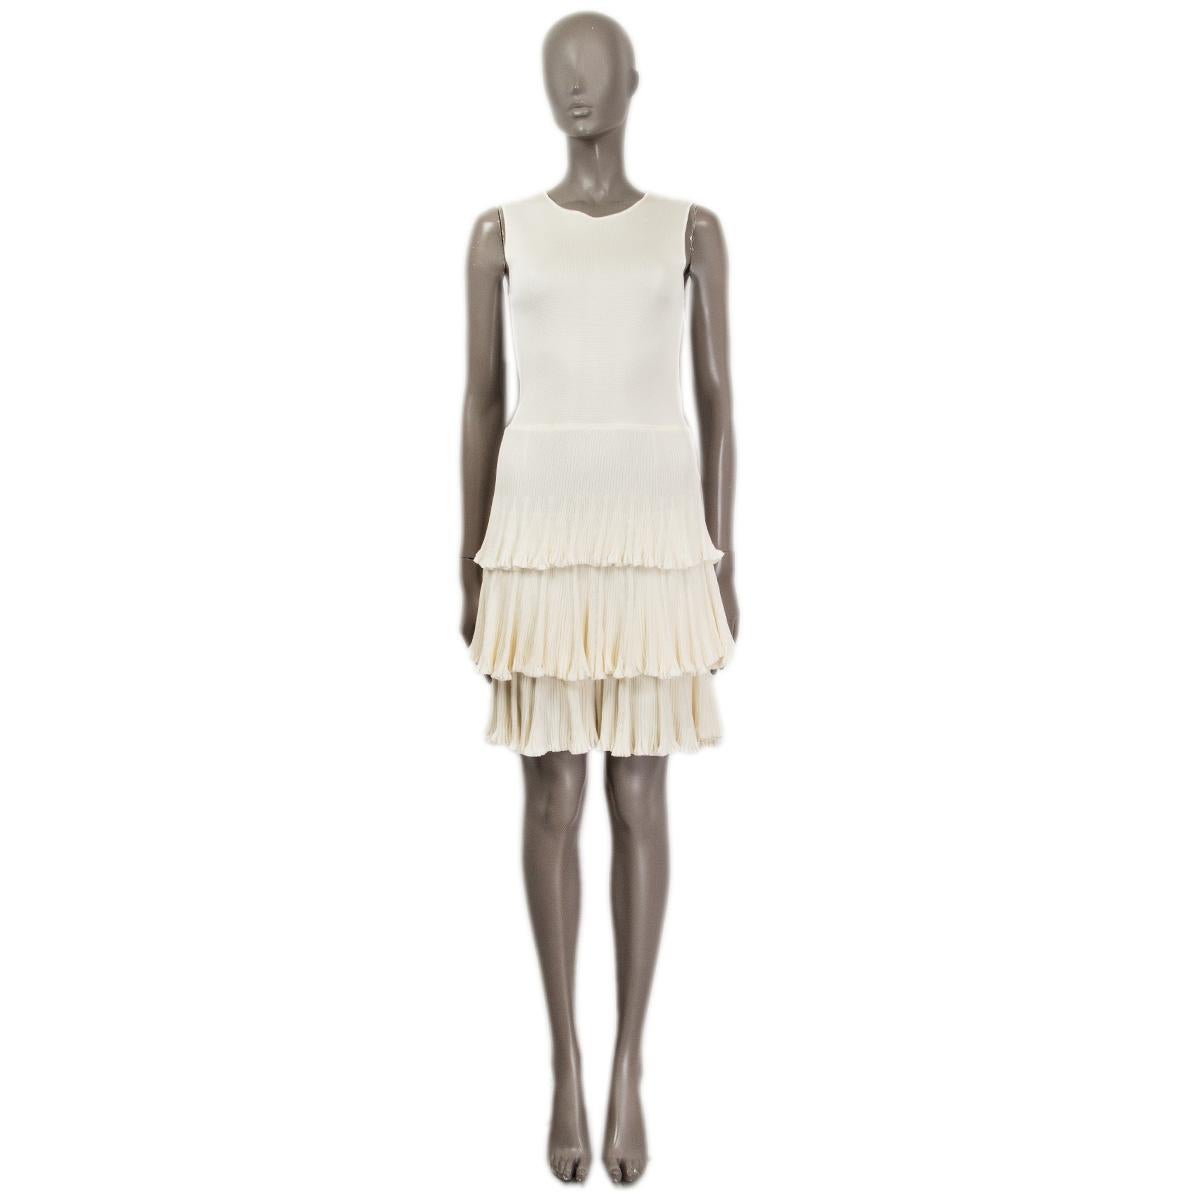 100% authentic Christian Dior ruffle-panelled knit dress in cream viscose (100%). Opens with a concealed zipper on the side and with two buttons on the back. Lined in viscose (90%) and spandex (10%). Has been worn and is in excellent condition.